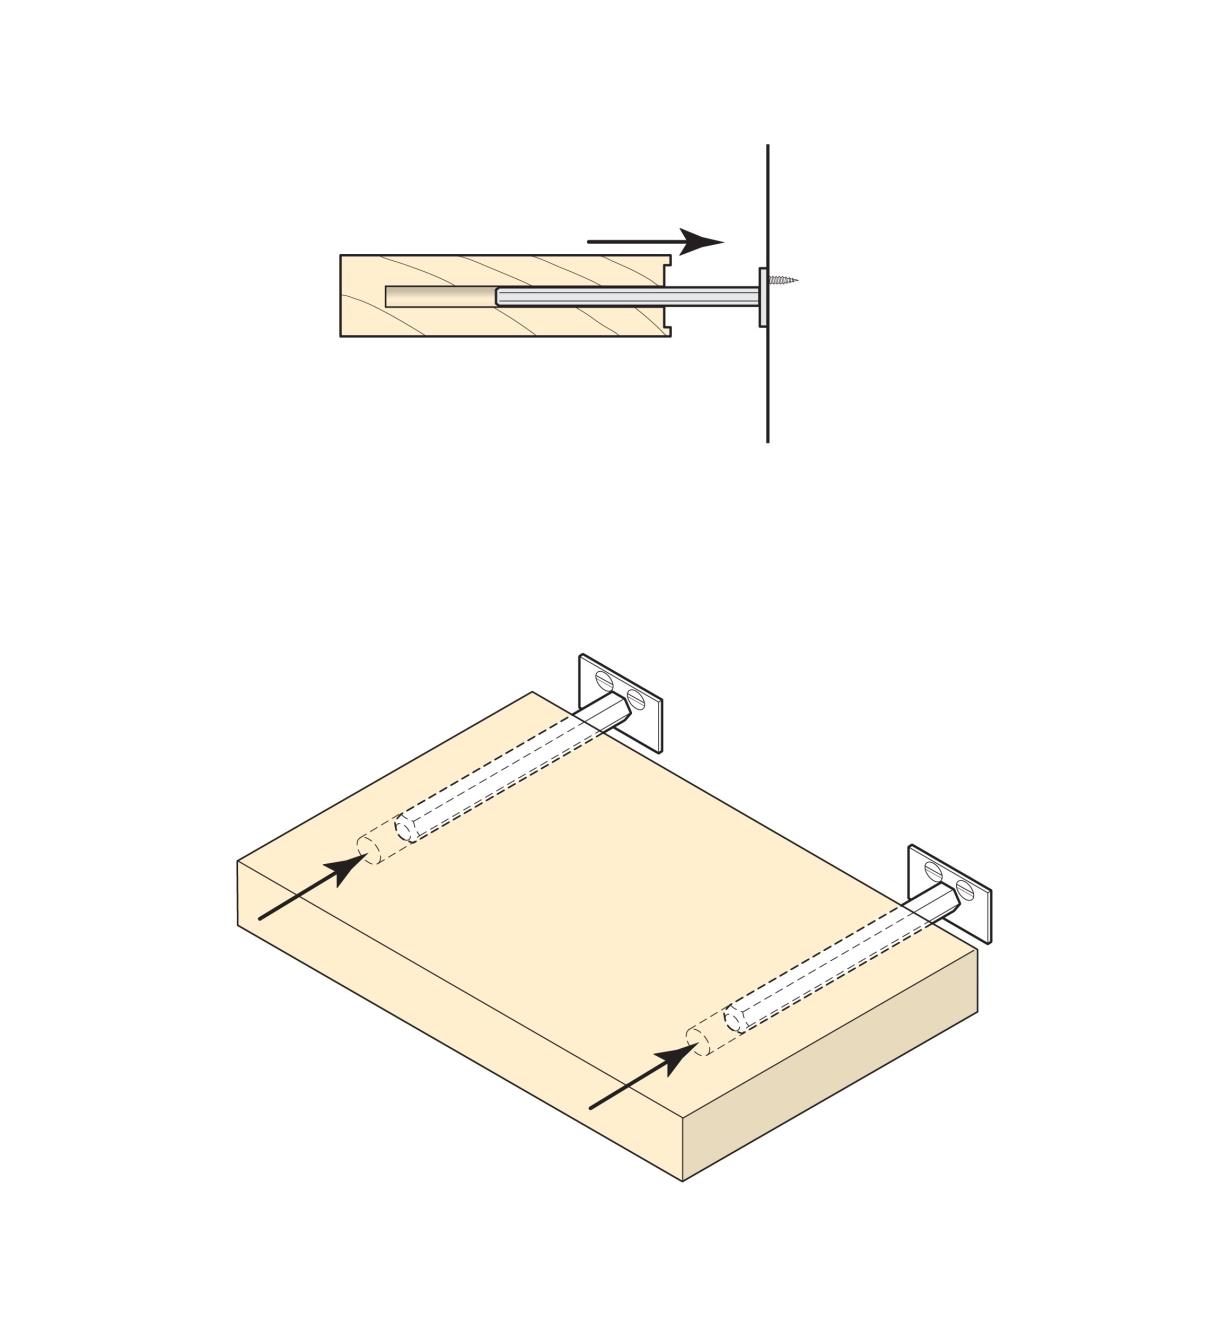 Illustrations shows how shelf support posts slip into holes drilled in a shelf